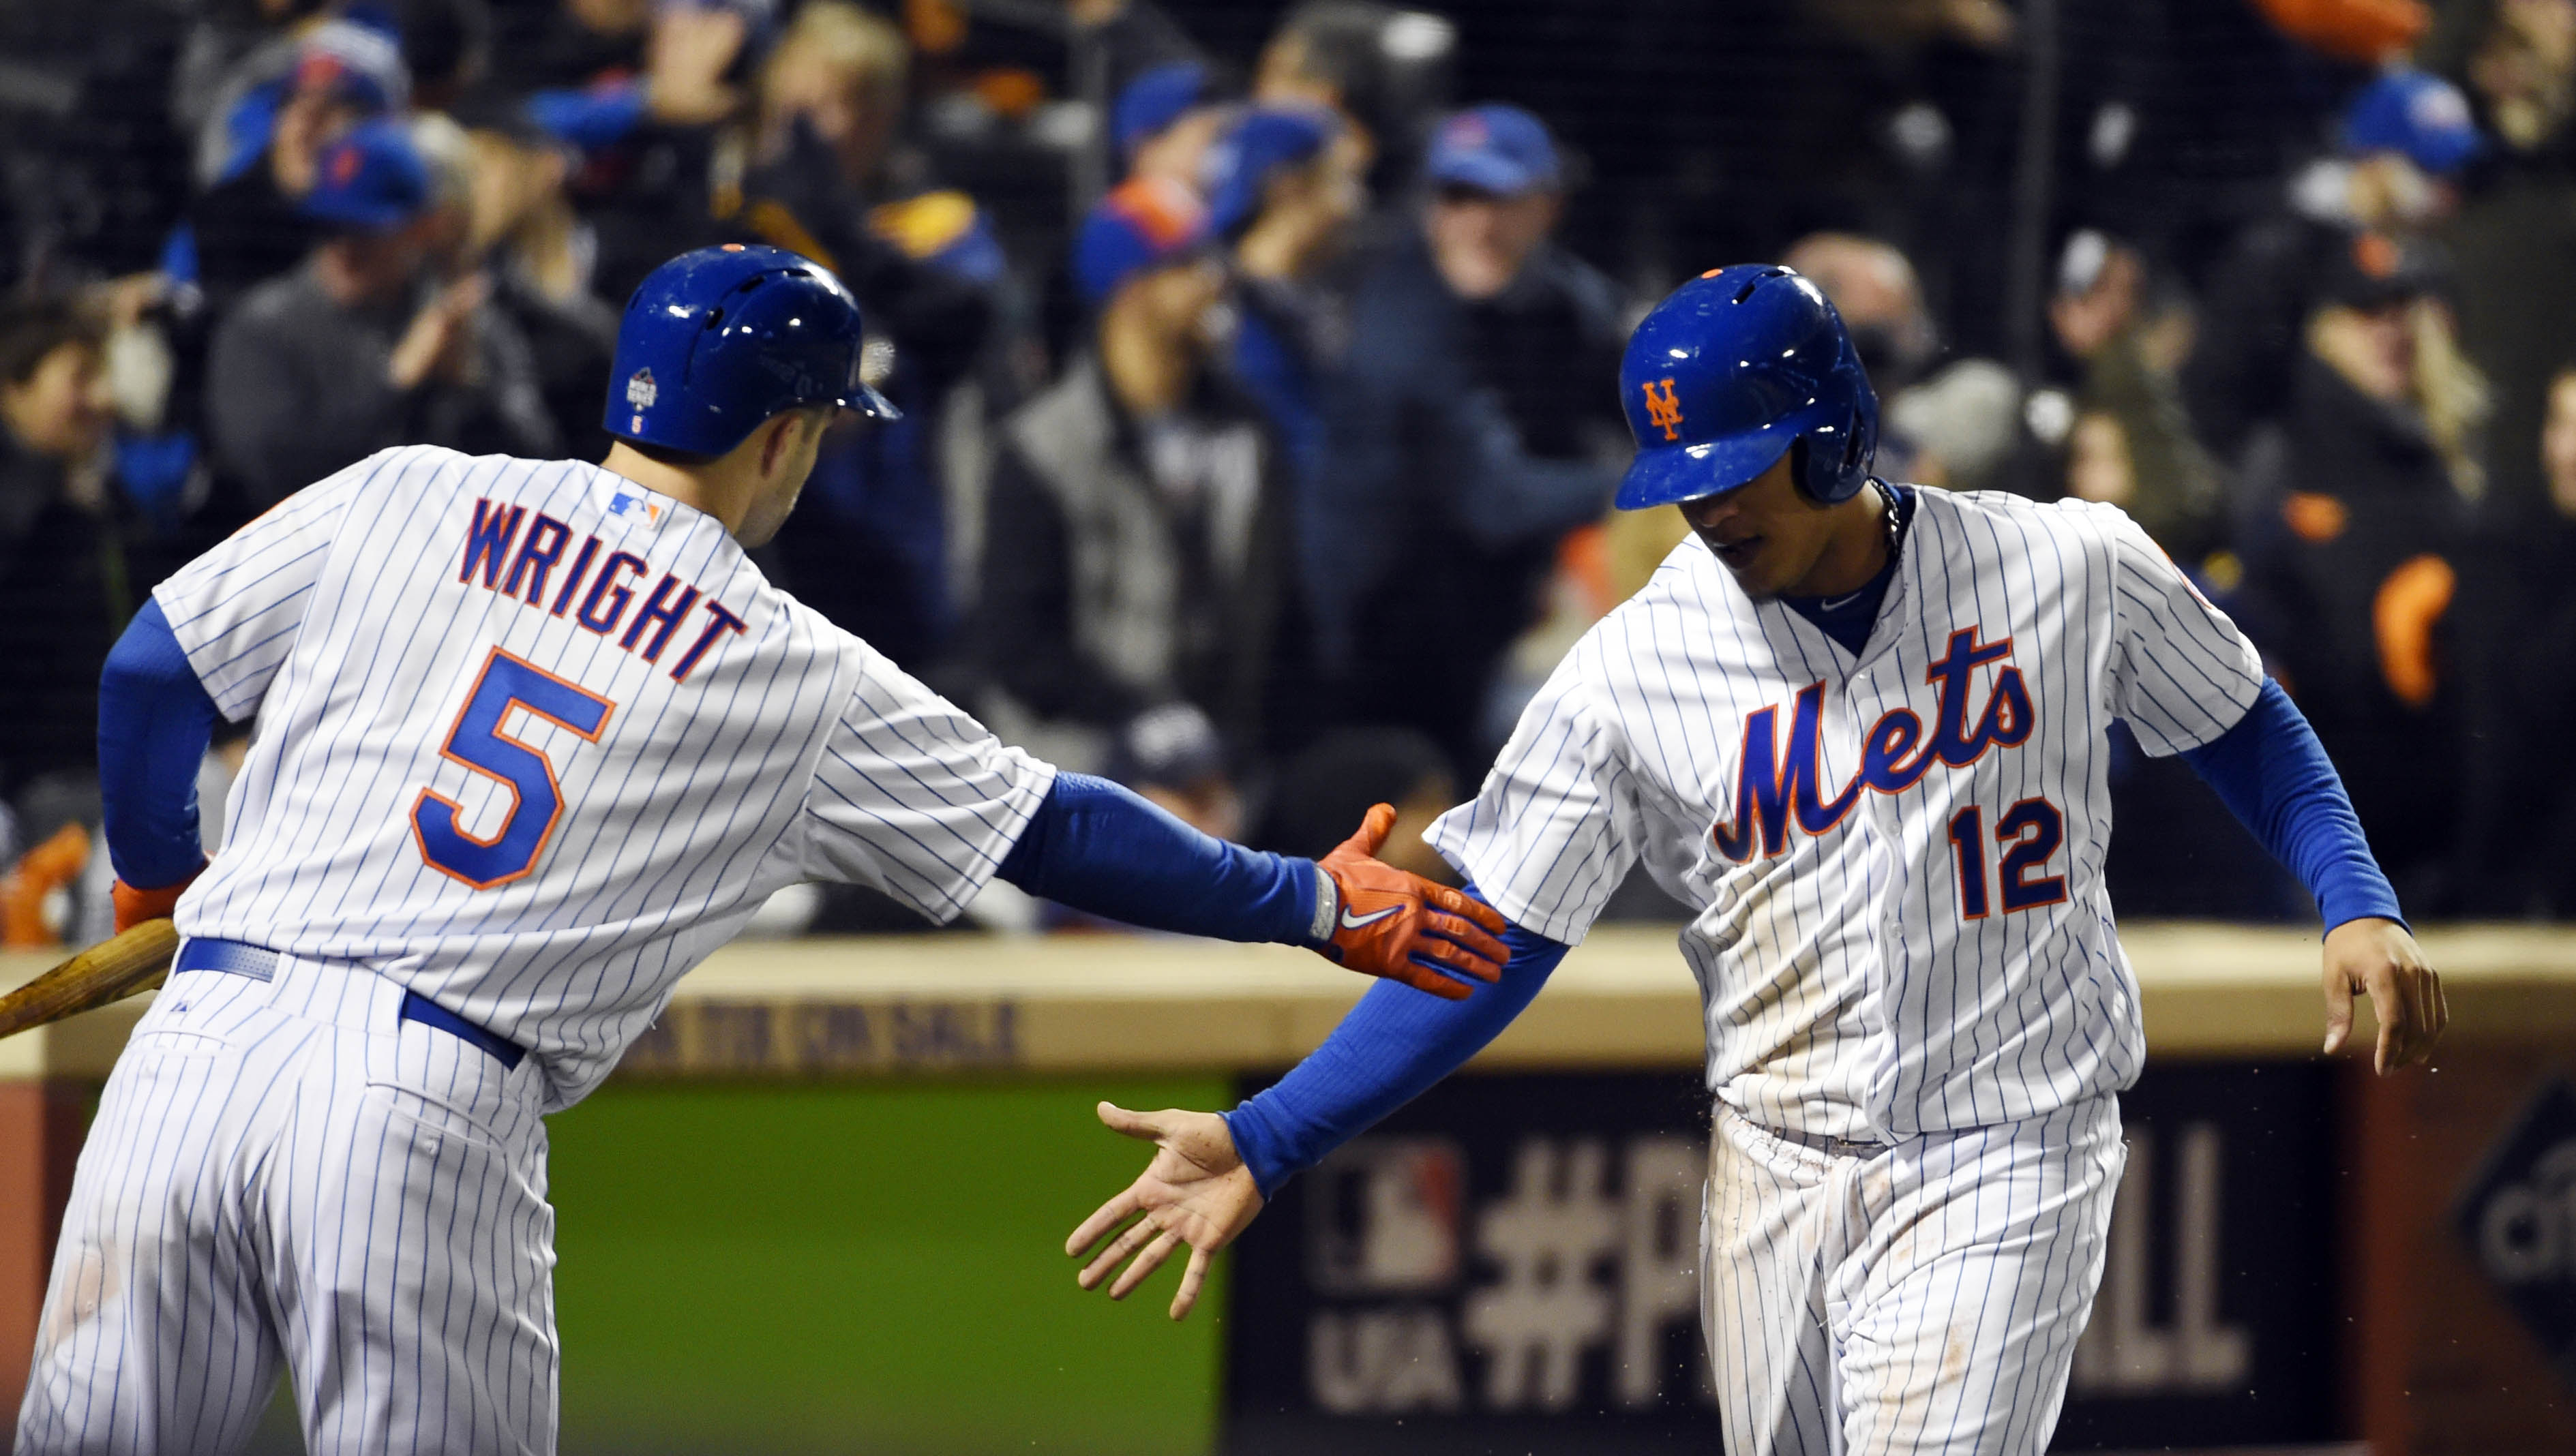 Wright powers Mets past Royals in World Series